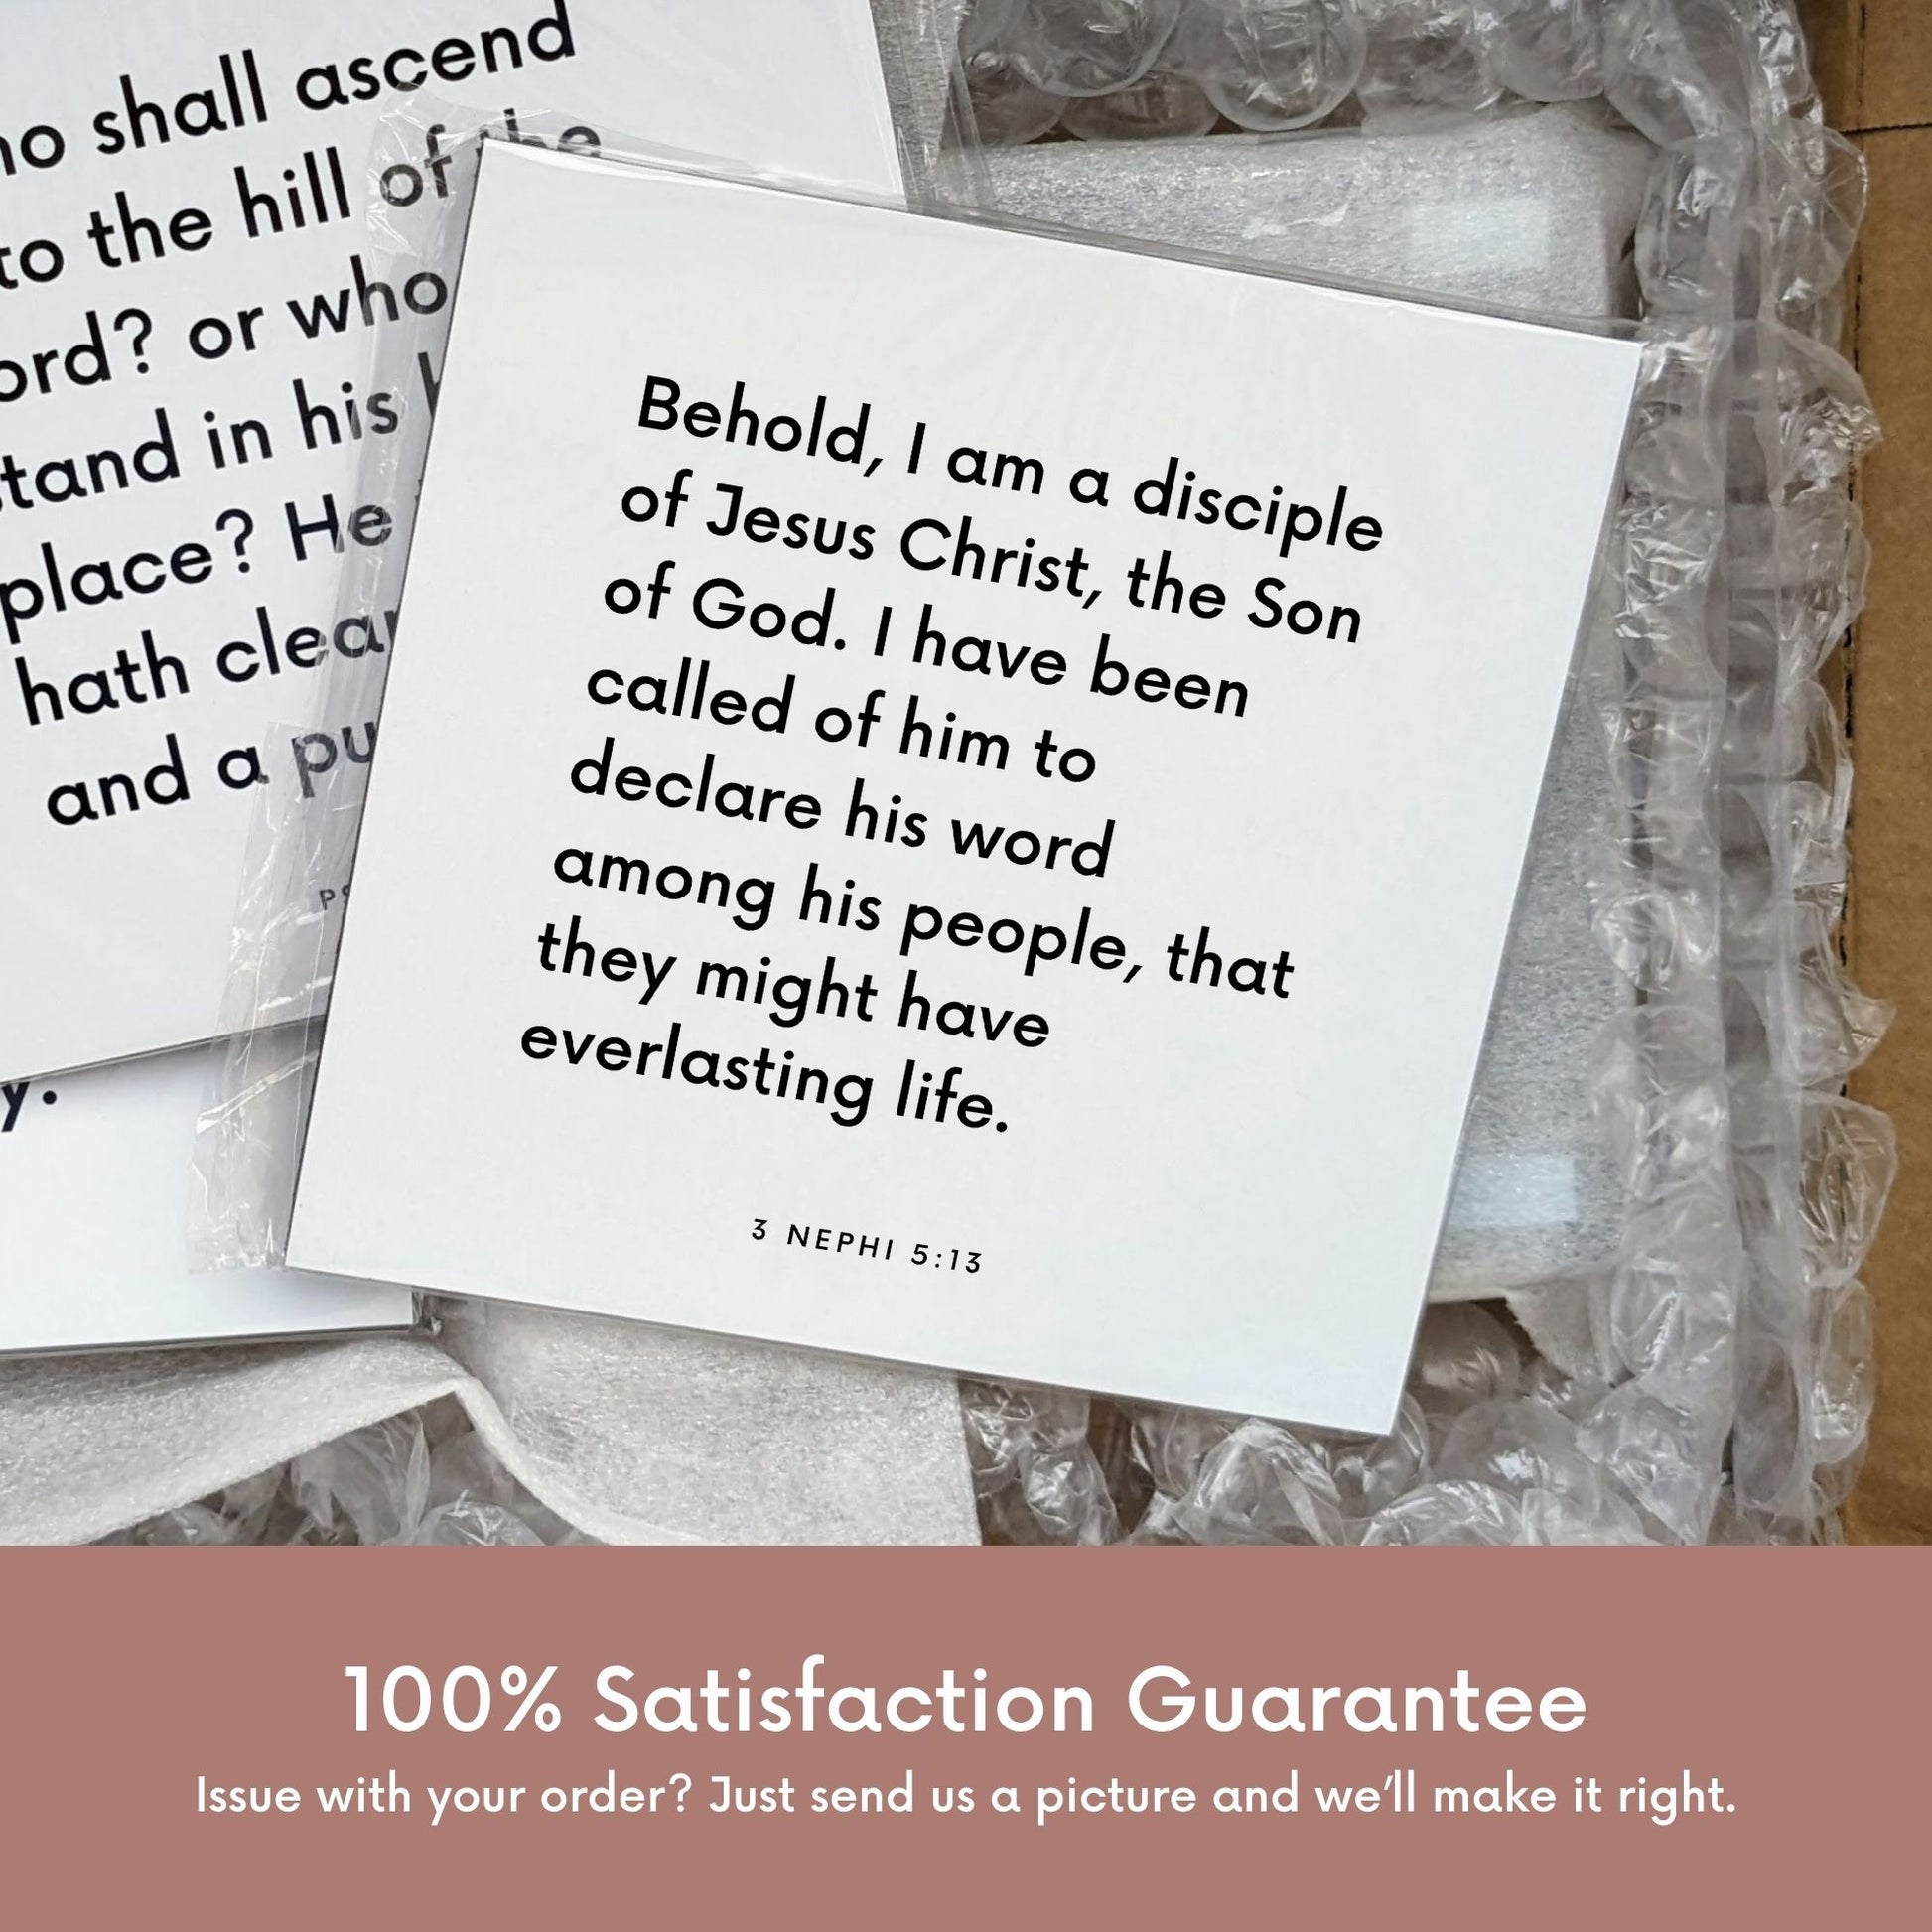 Shipping materials for scripture tile of 3 Nephi 5:13 - "Behold, I am a disciple of Jesus Christ, the Son of God"